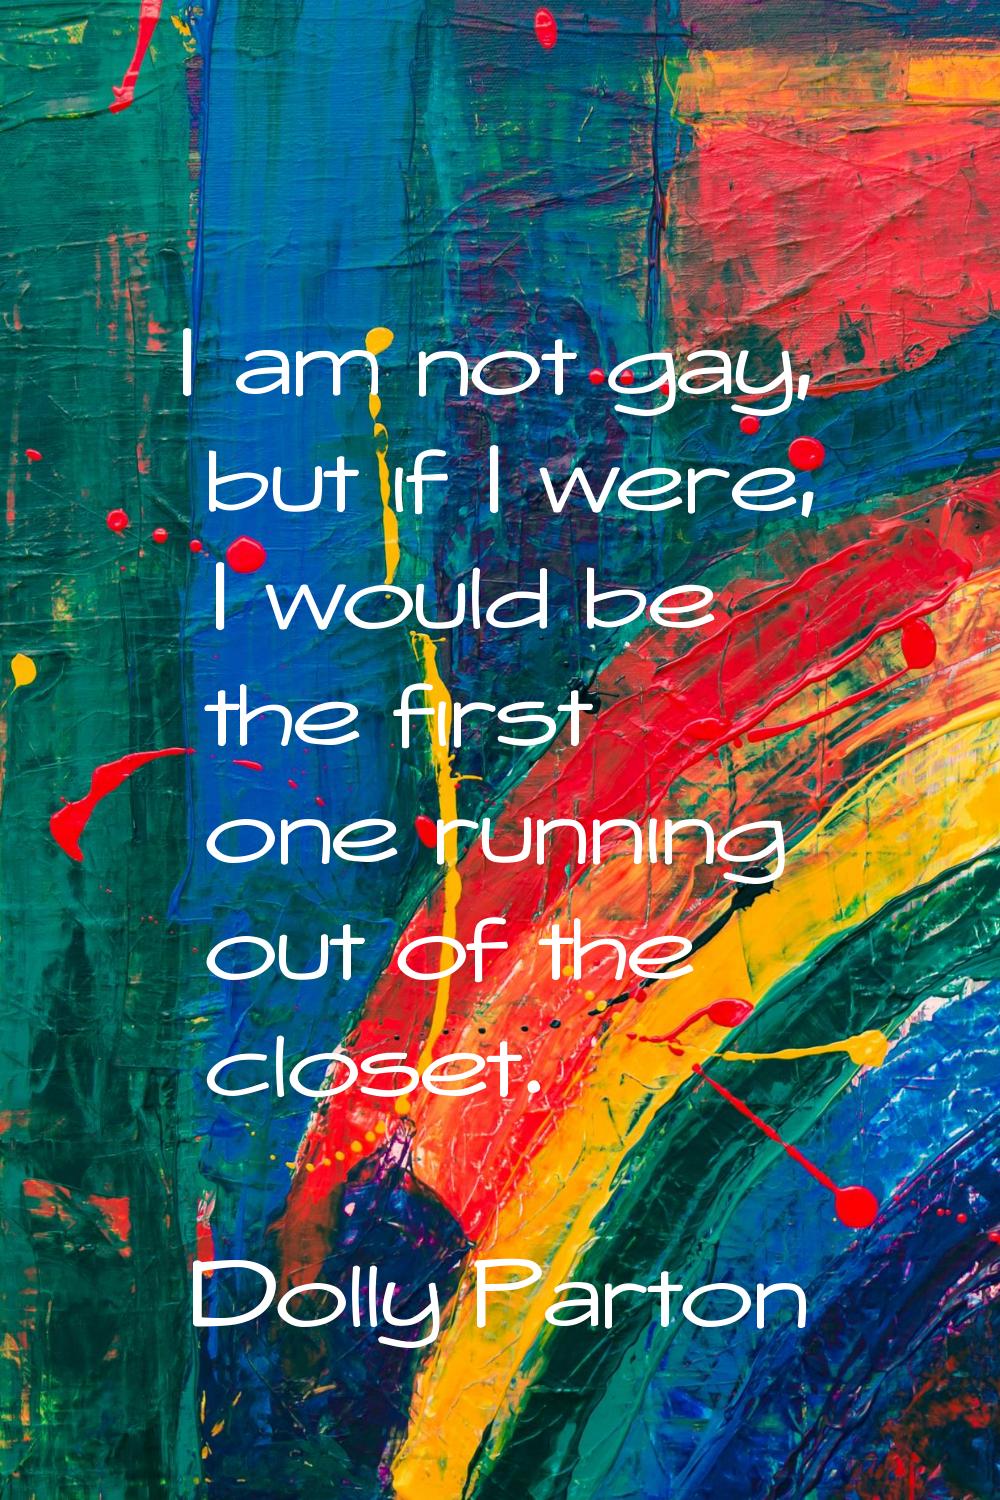 I am not gay, but if I were, I would be the first one running out of the closet.